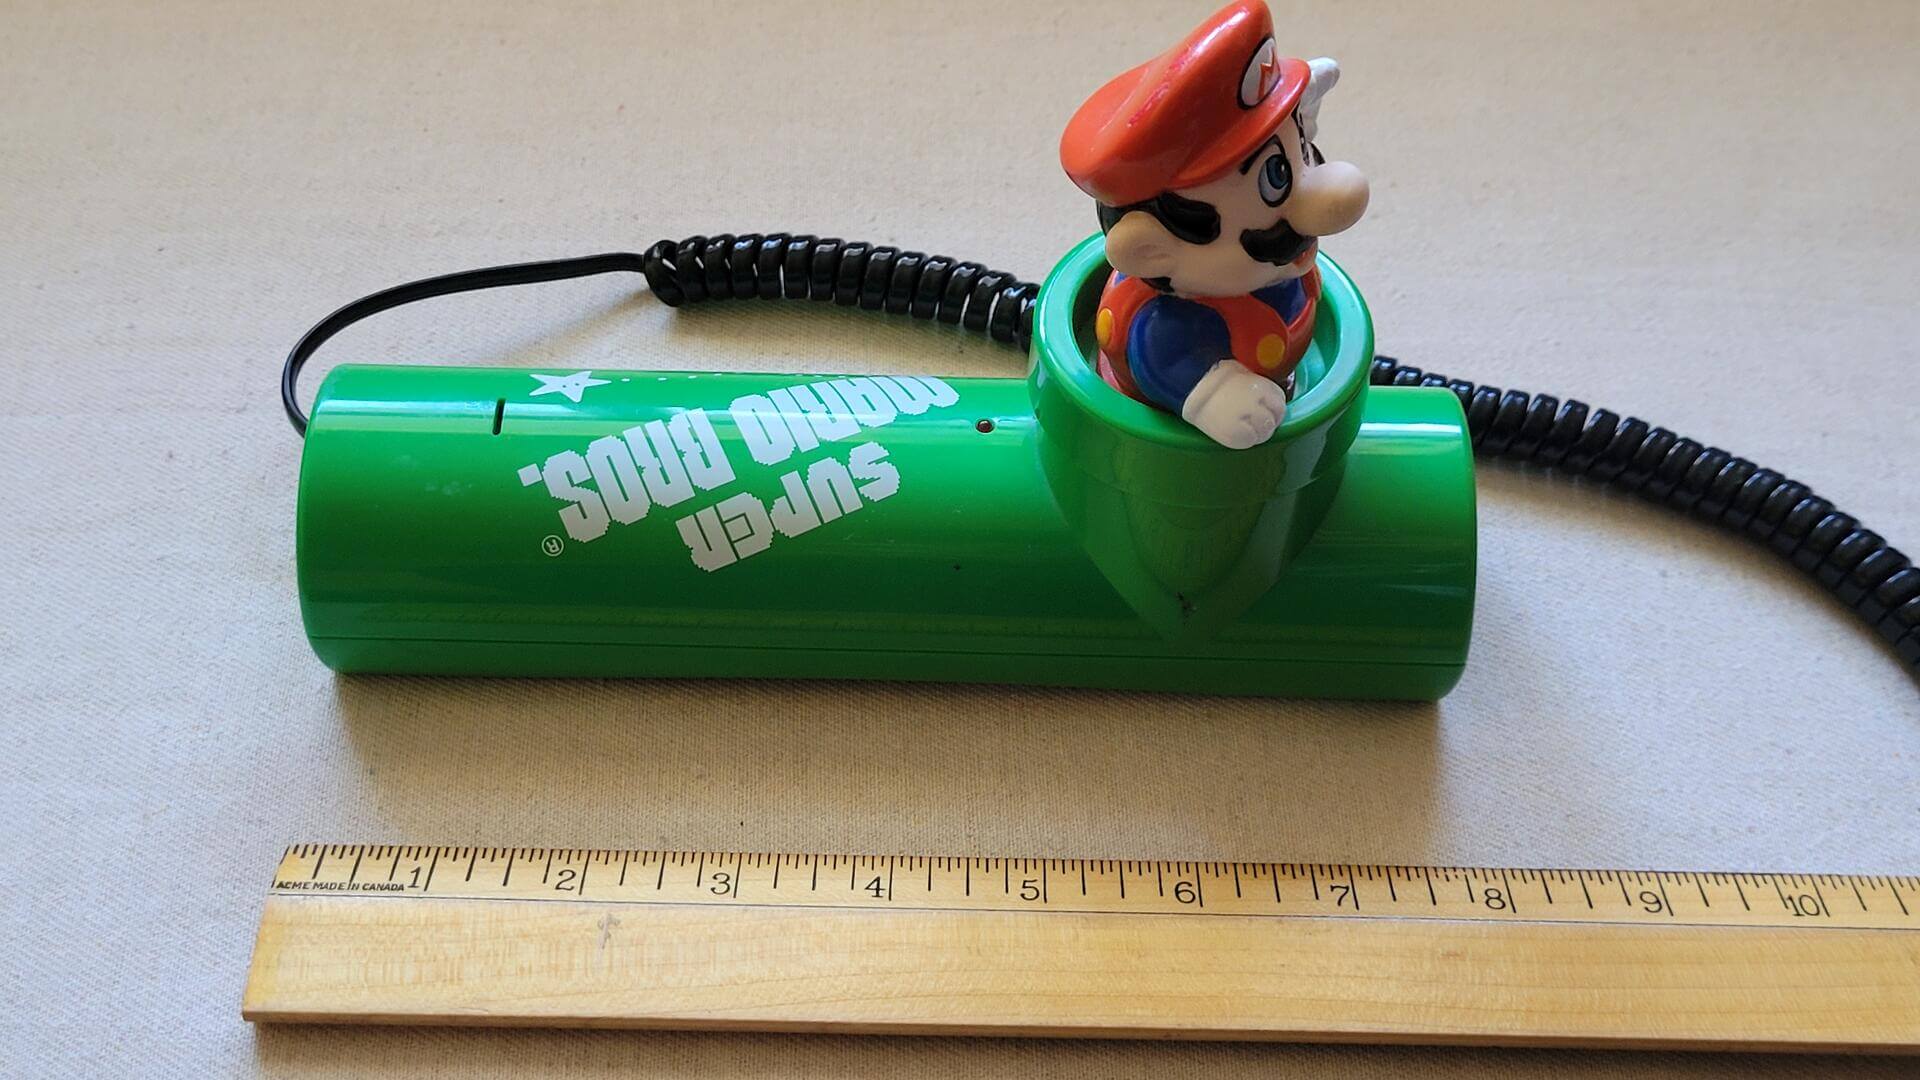 Rare vintage green Super Mario Brothers Nintendo touch tone telephone model MBS-38. Retro 1990s made in Hong Kong collectible Nintendo phone and electronic gadget